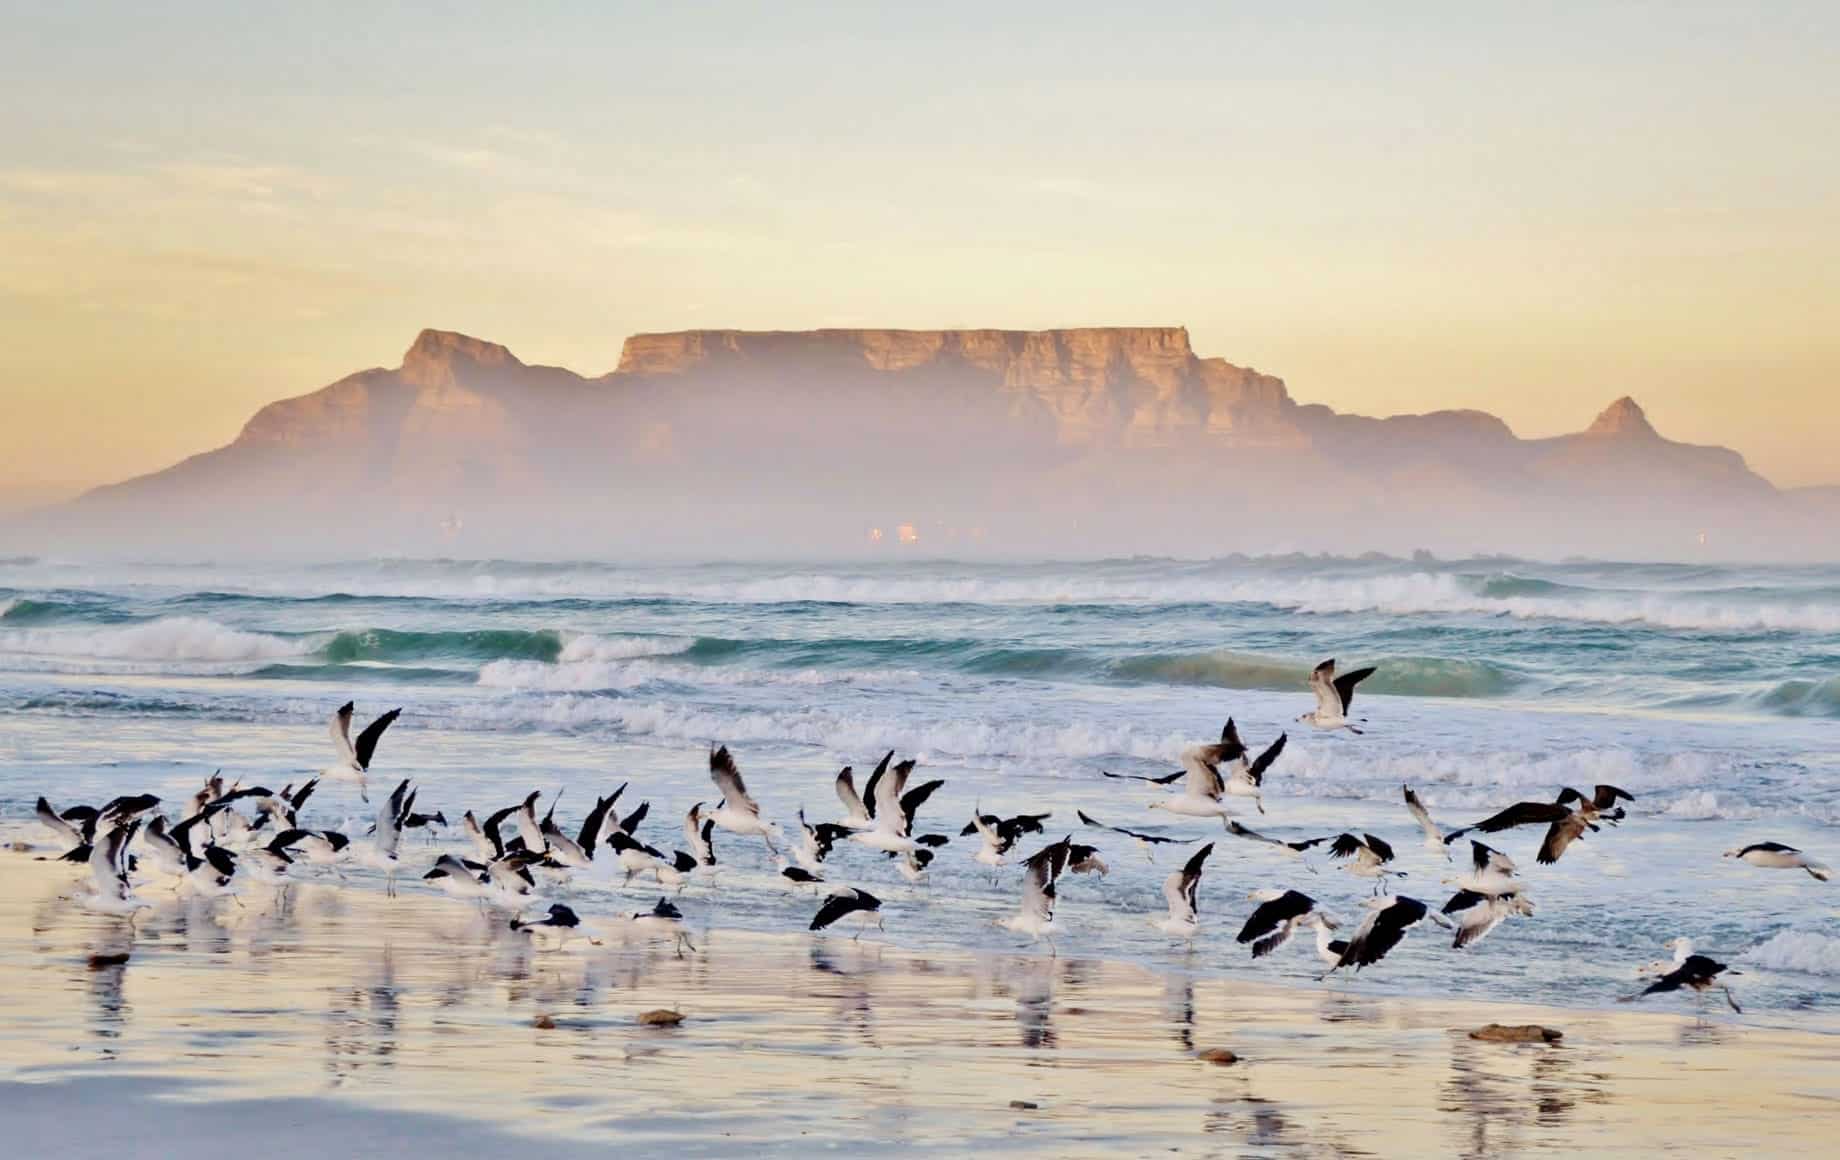 The Cape Town